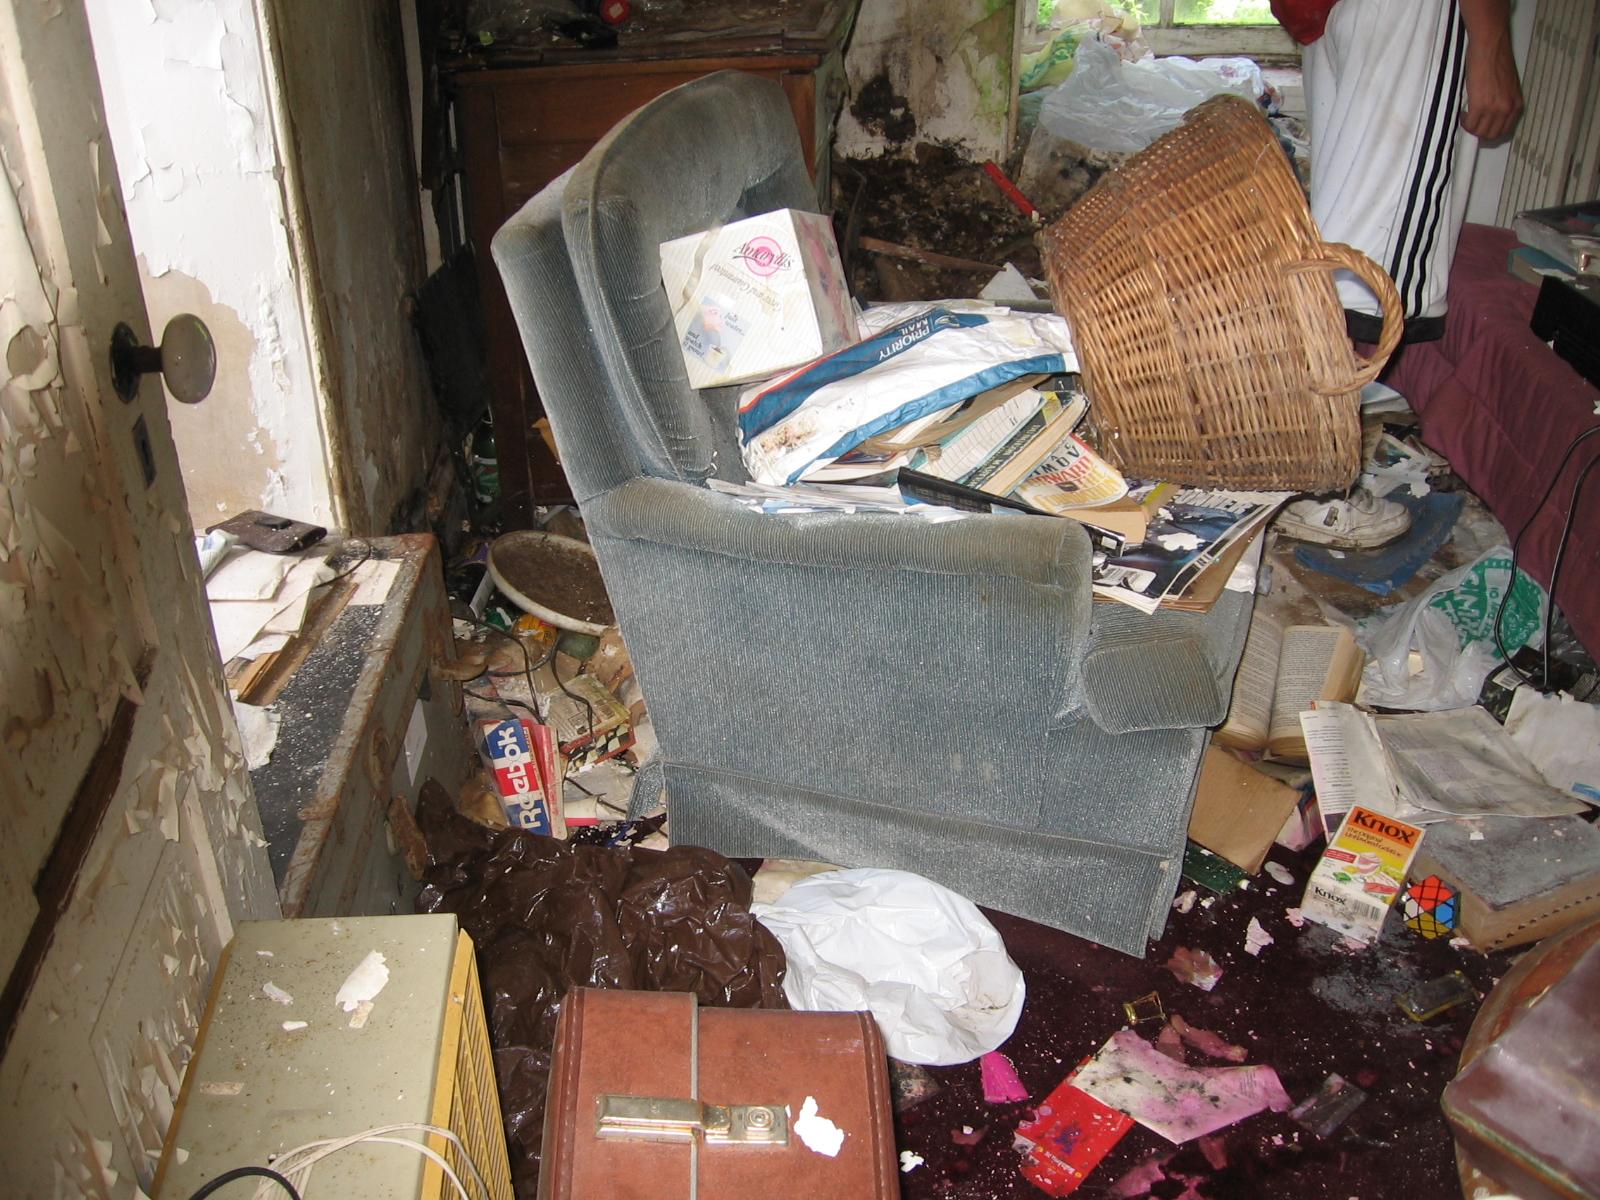 trashed rooms